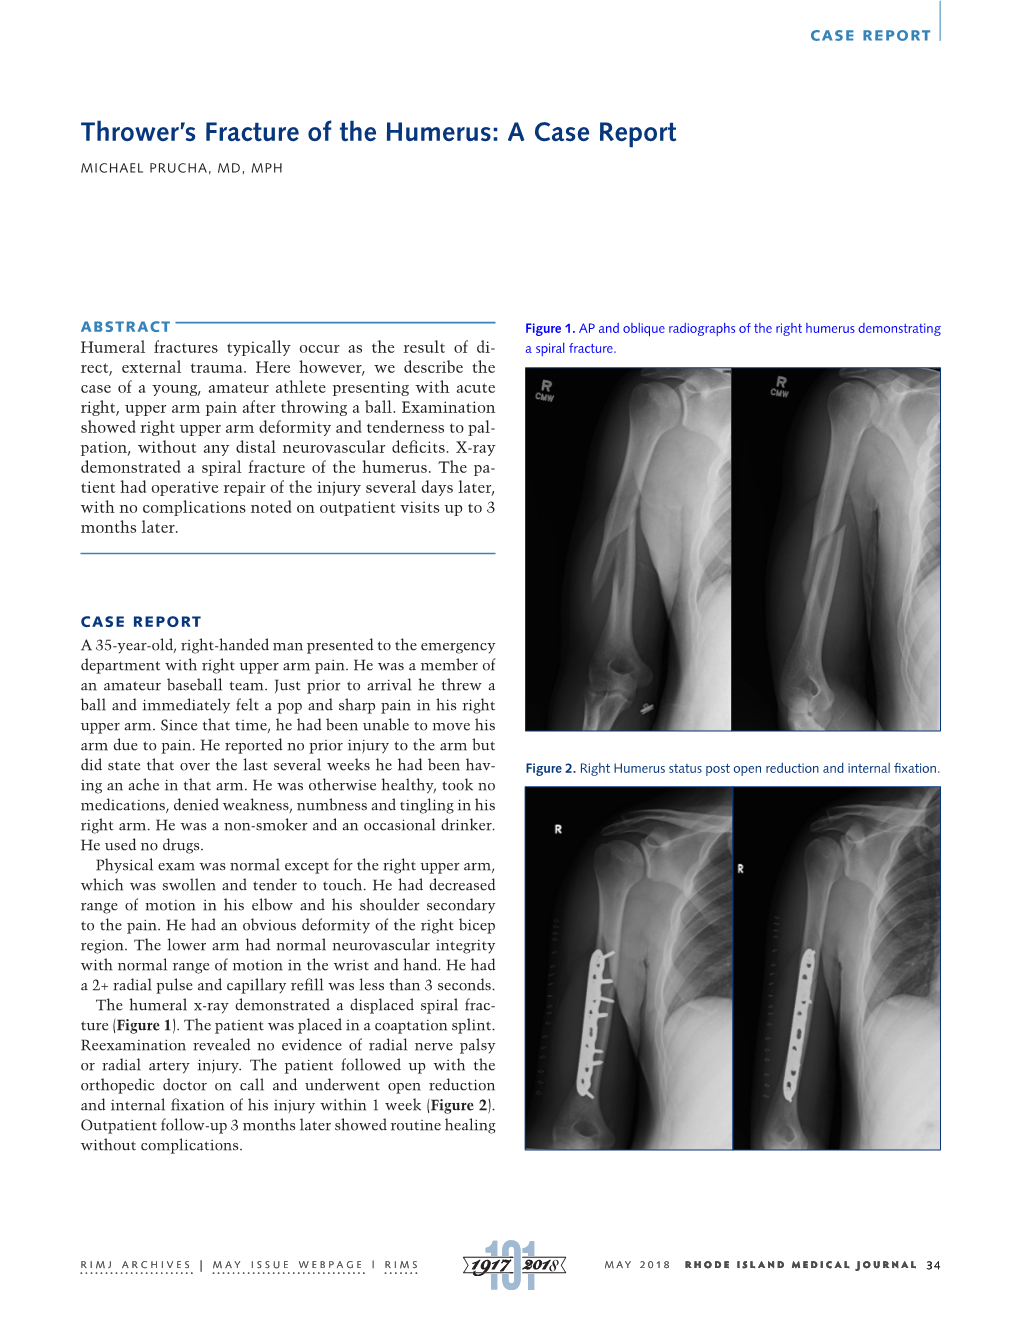 Thrower's Fracture of the Humerus: a Case Report